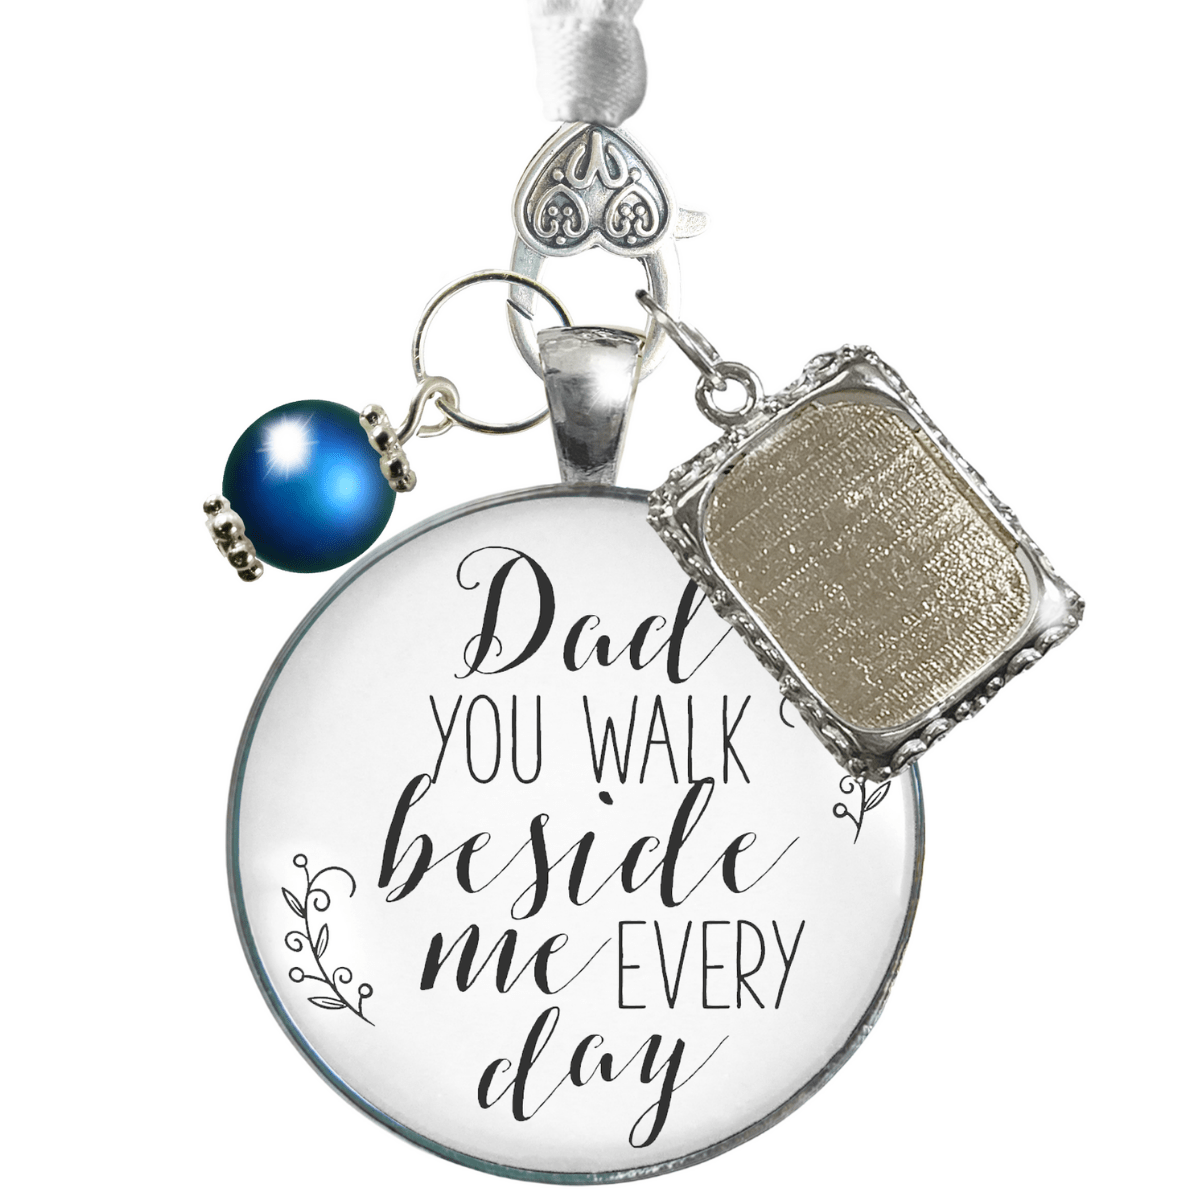 Bridal Bouquet Charm Dad You Walk Beside Me White Wedding Pendant Father Memorial Photo Silver Finish Jewelry - Gutsy Goodness Handmade Jewelry Gifts